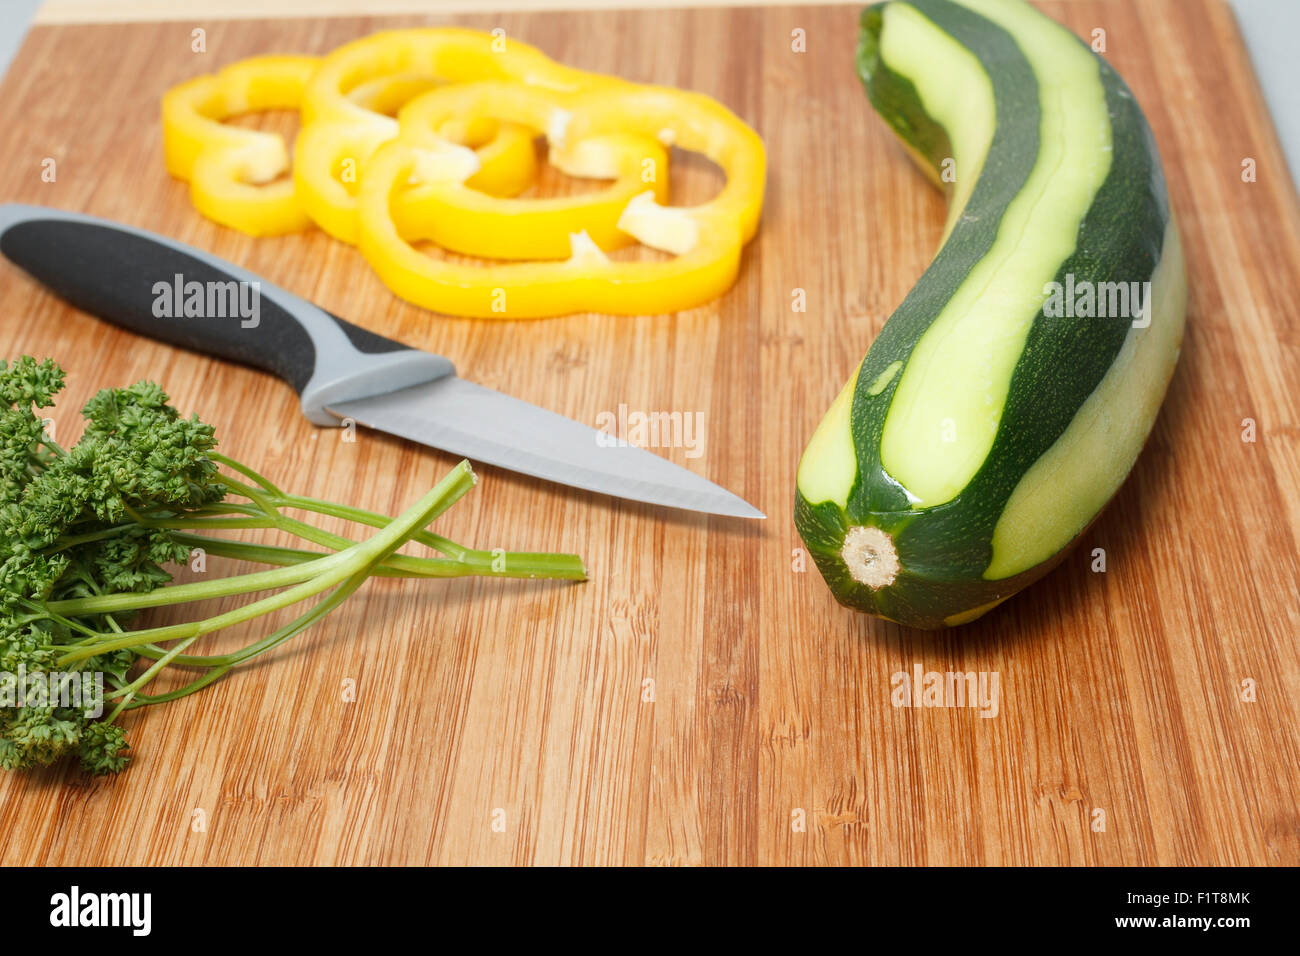 Cutting board with herbs sliced pepper zucchini and a knife. Stock Photo